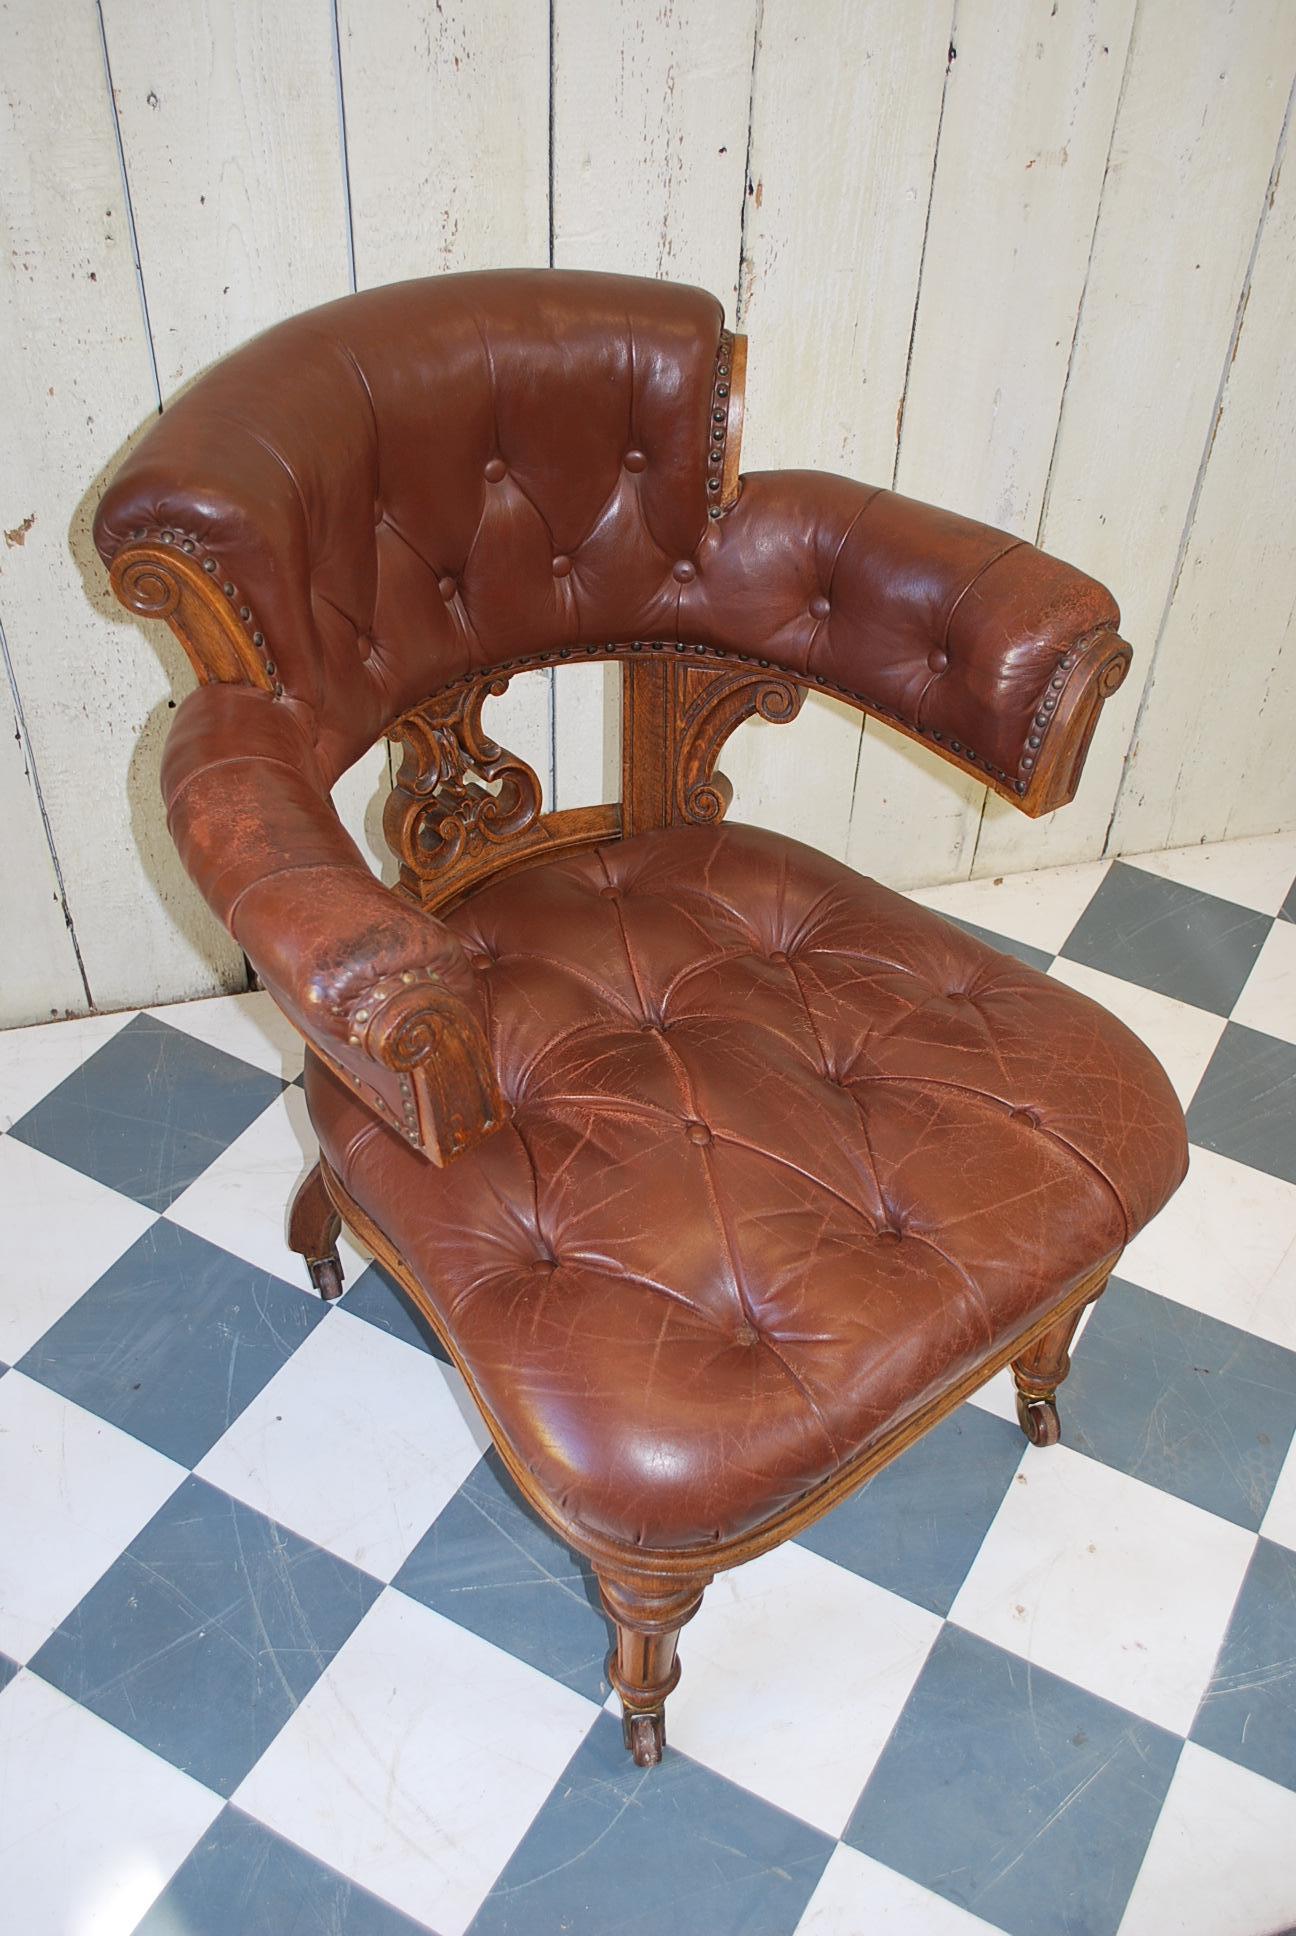 An important oversized oak desk chair with nicely worn brown leather deep button upholstery, probably by Holland and Son or a similar maker. One of the best examples I have had the pleasure of owning. Excellent condition generally for age. Just that